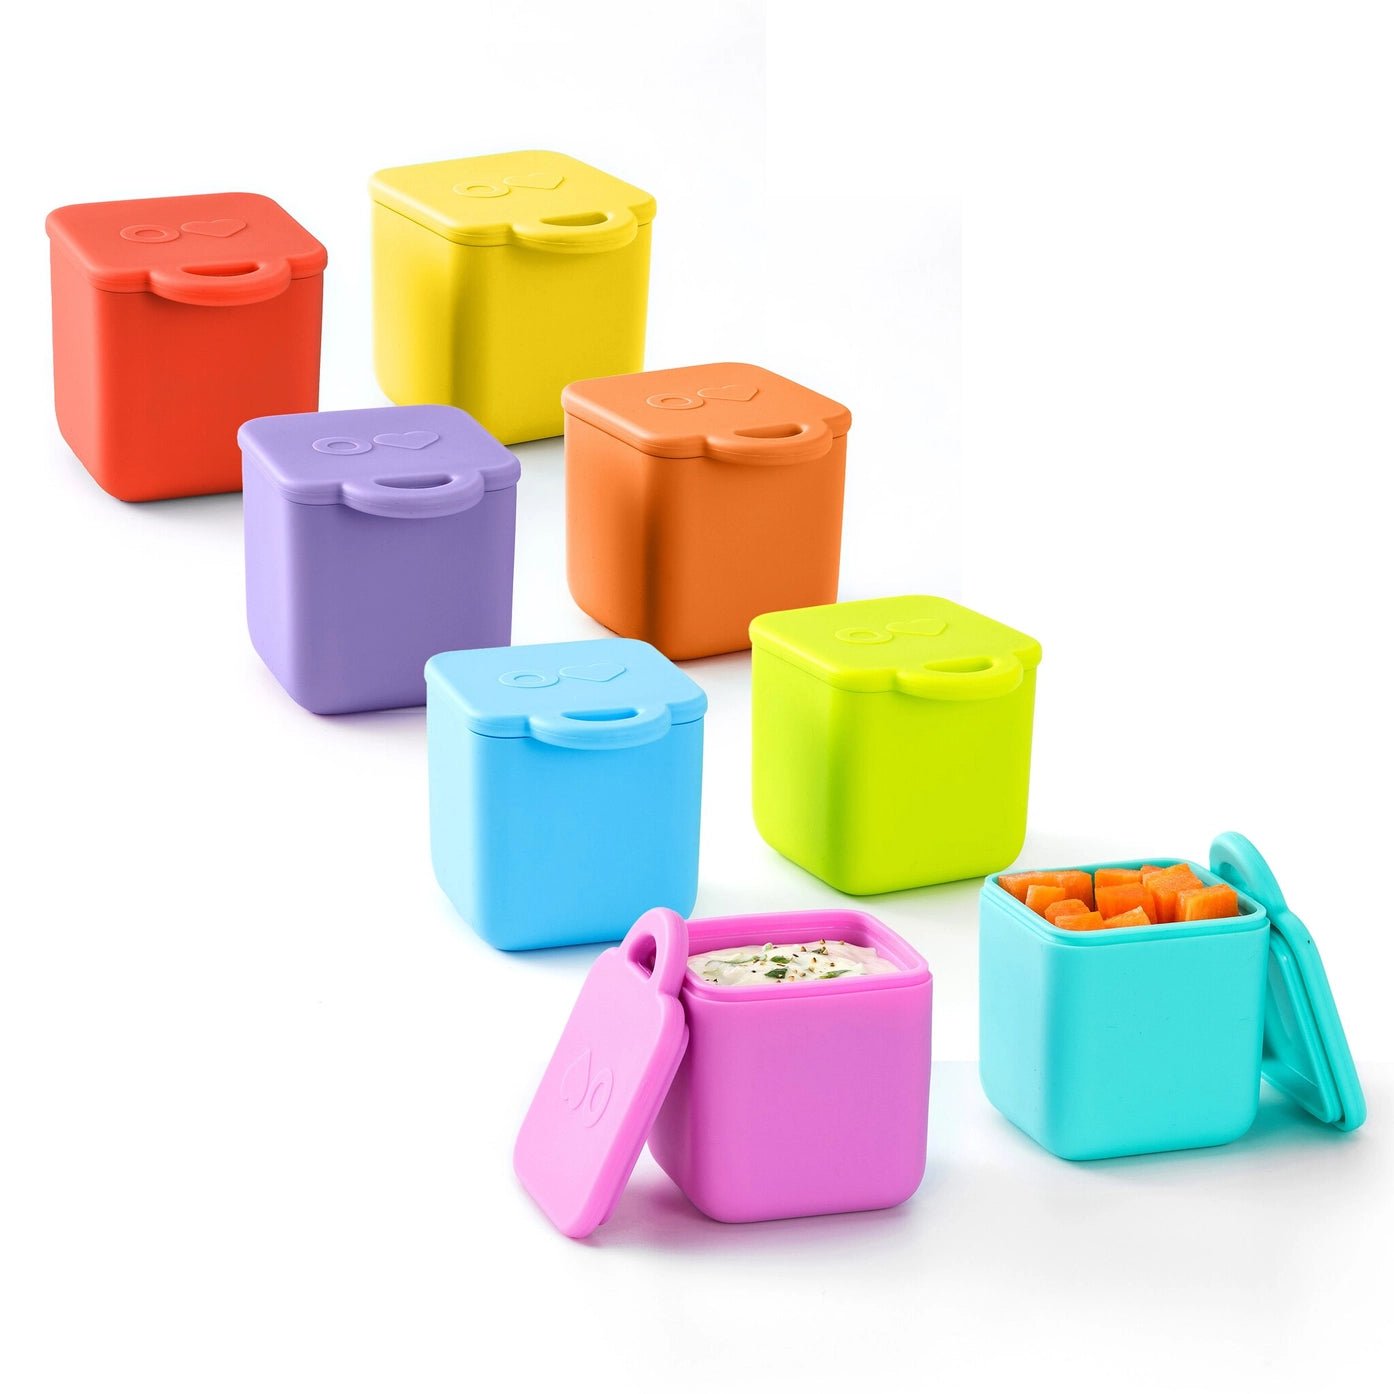 https://cdn.shopify.com/s/files/1/0275/1876/3088/products/omiedip-container-set-878061_1445x.webp?v=1689575851